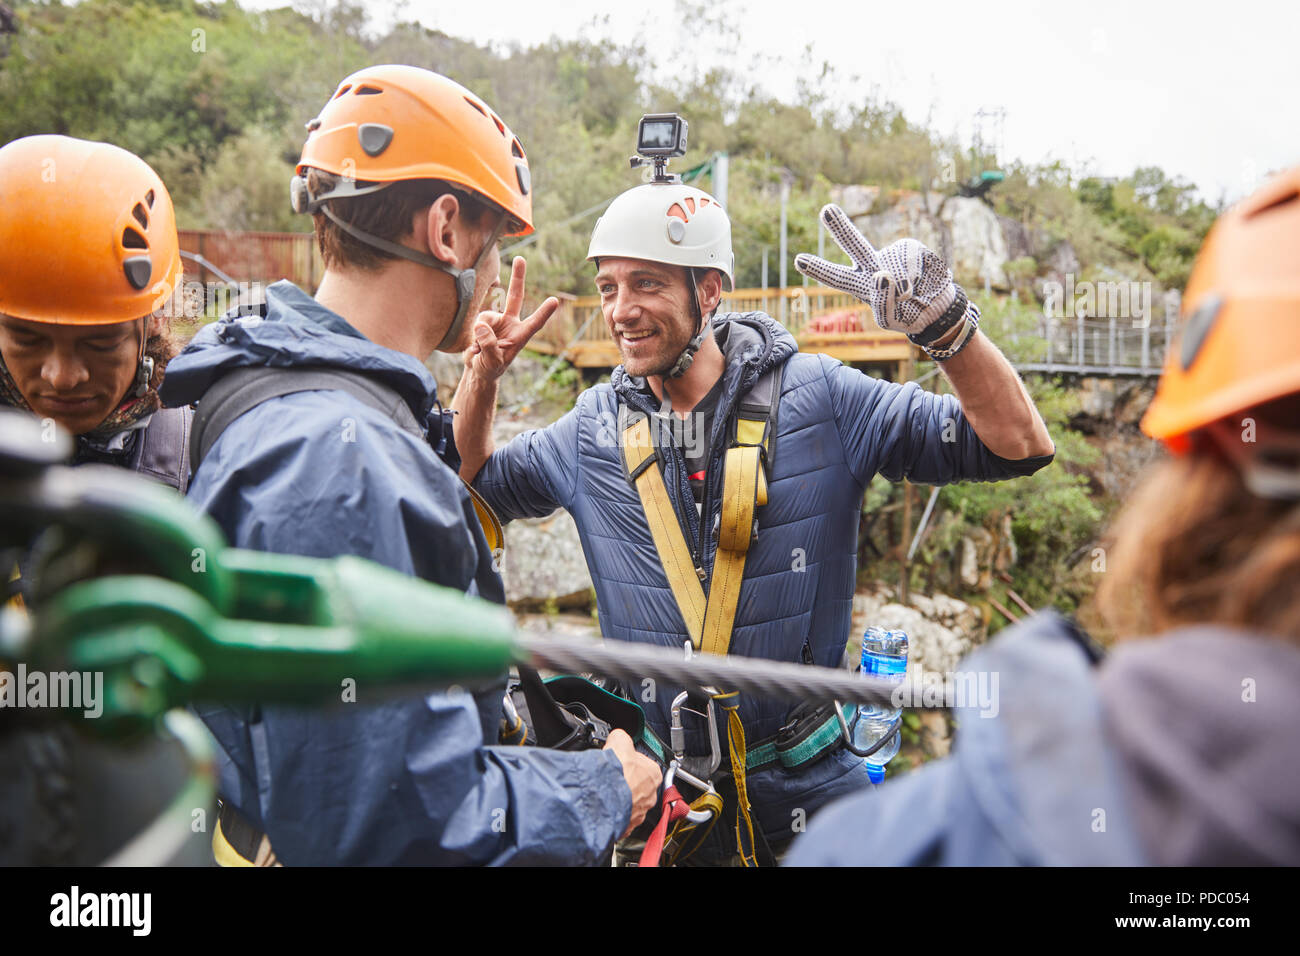 Enthusiastic man preparing to zip line, gesturing peace sign Stock Photo